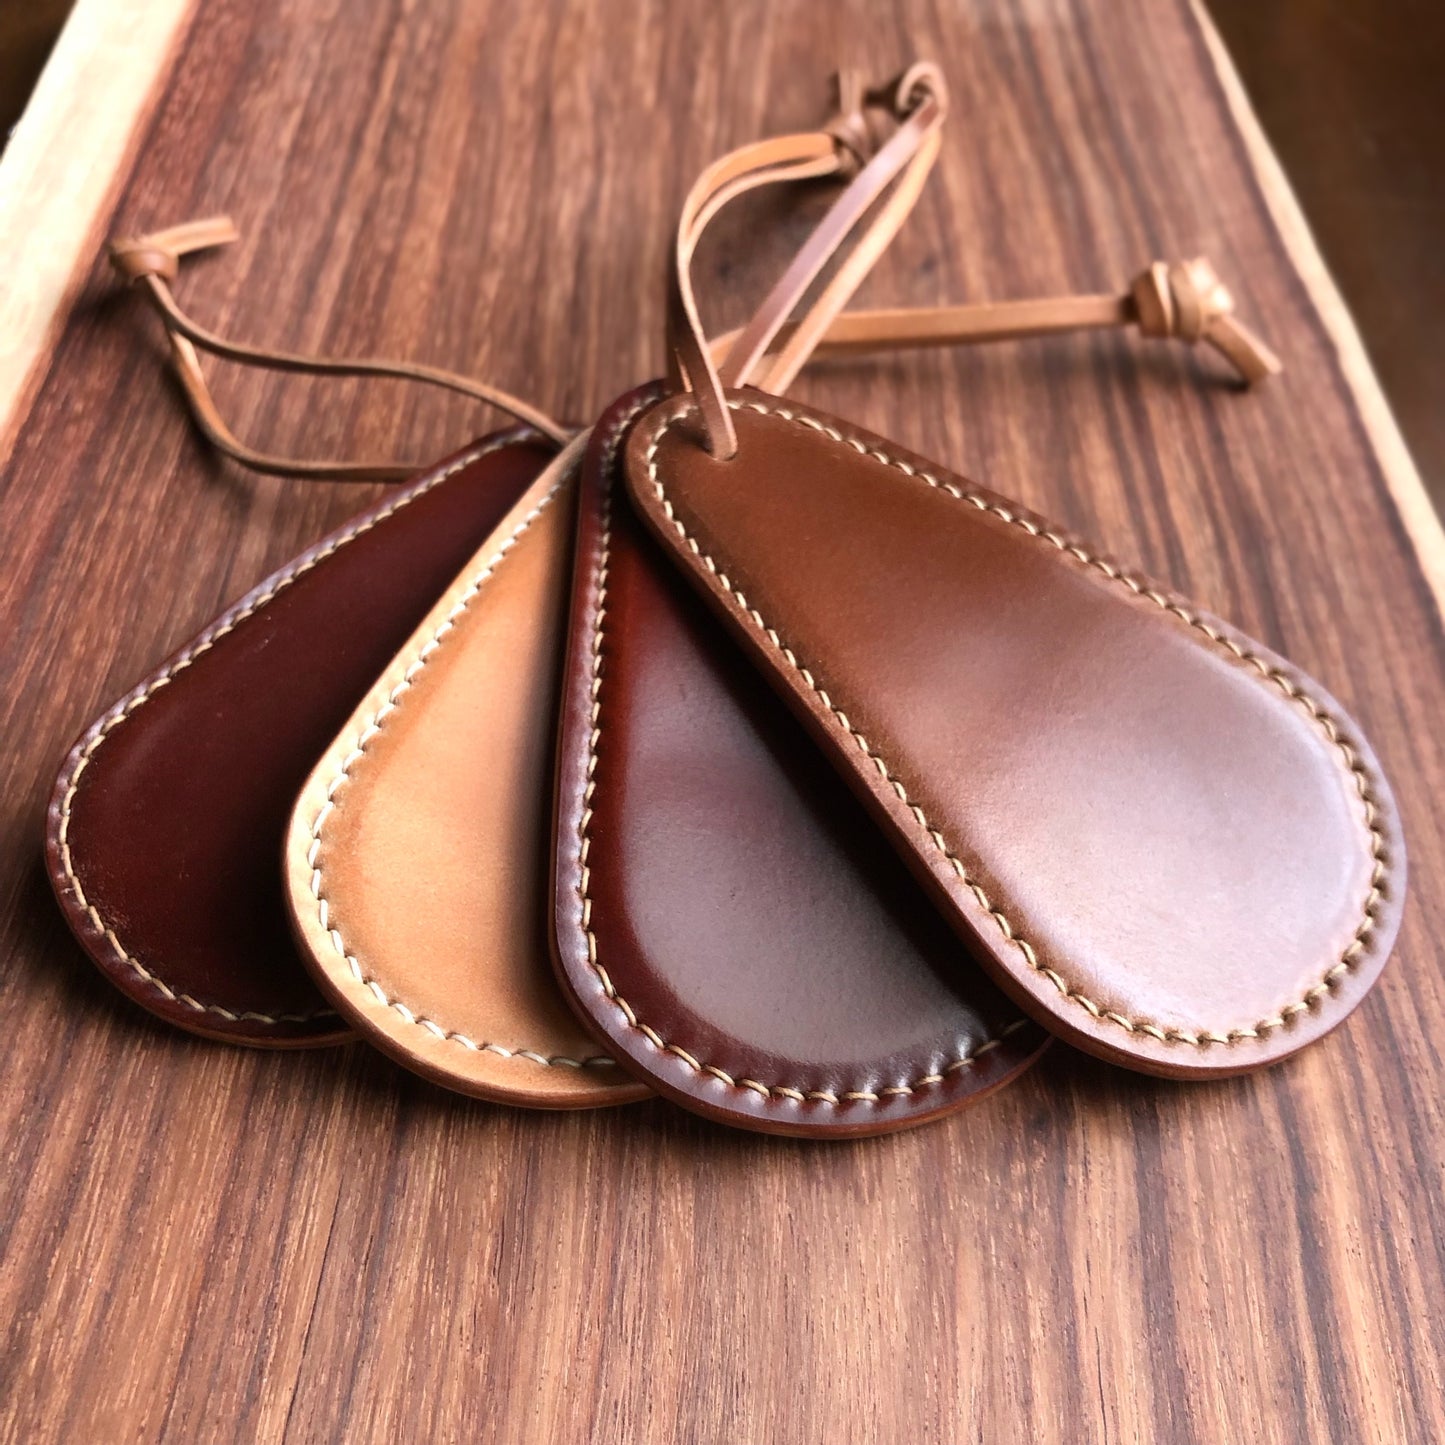 Shell Shoehorn【Horween】シェルコードバンの靴べら